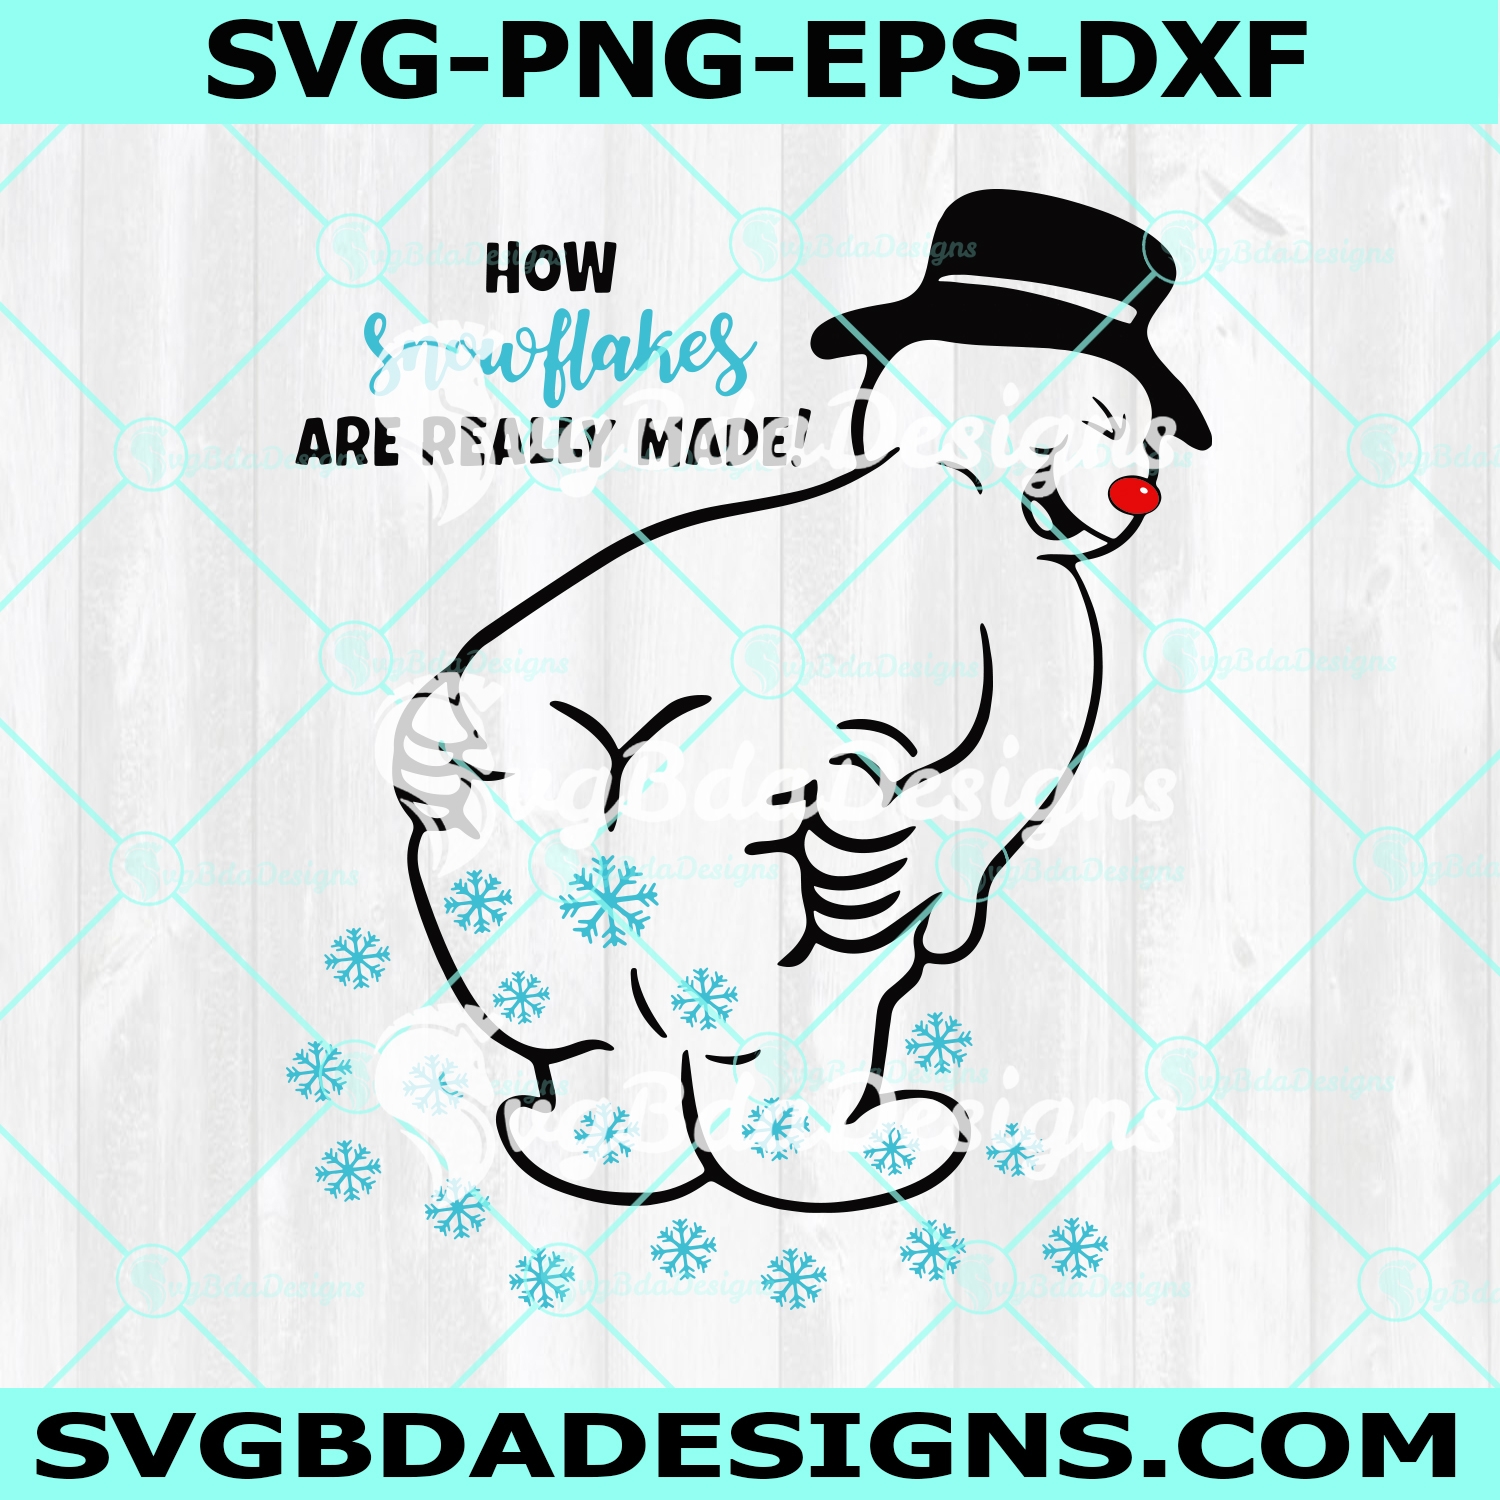 Snowflake Maker SVG, Funny Snowman Quote svg, How Snowflakes Are Really Made svg, Christmas Svg, Digital Download